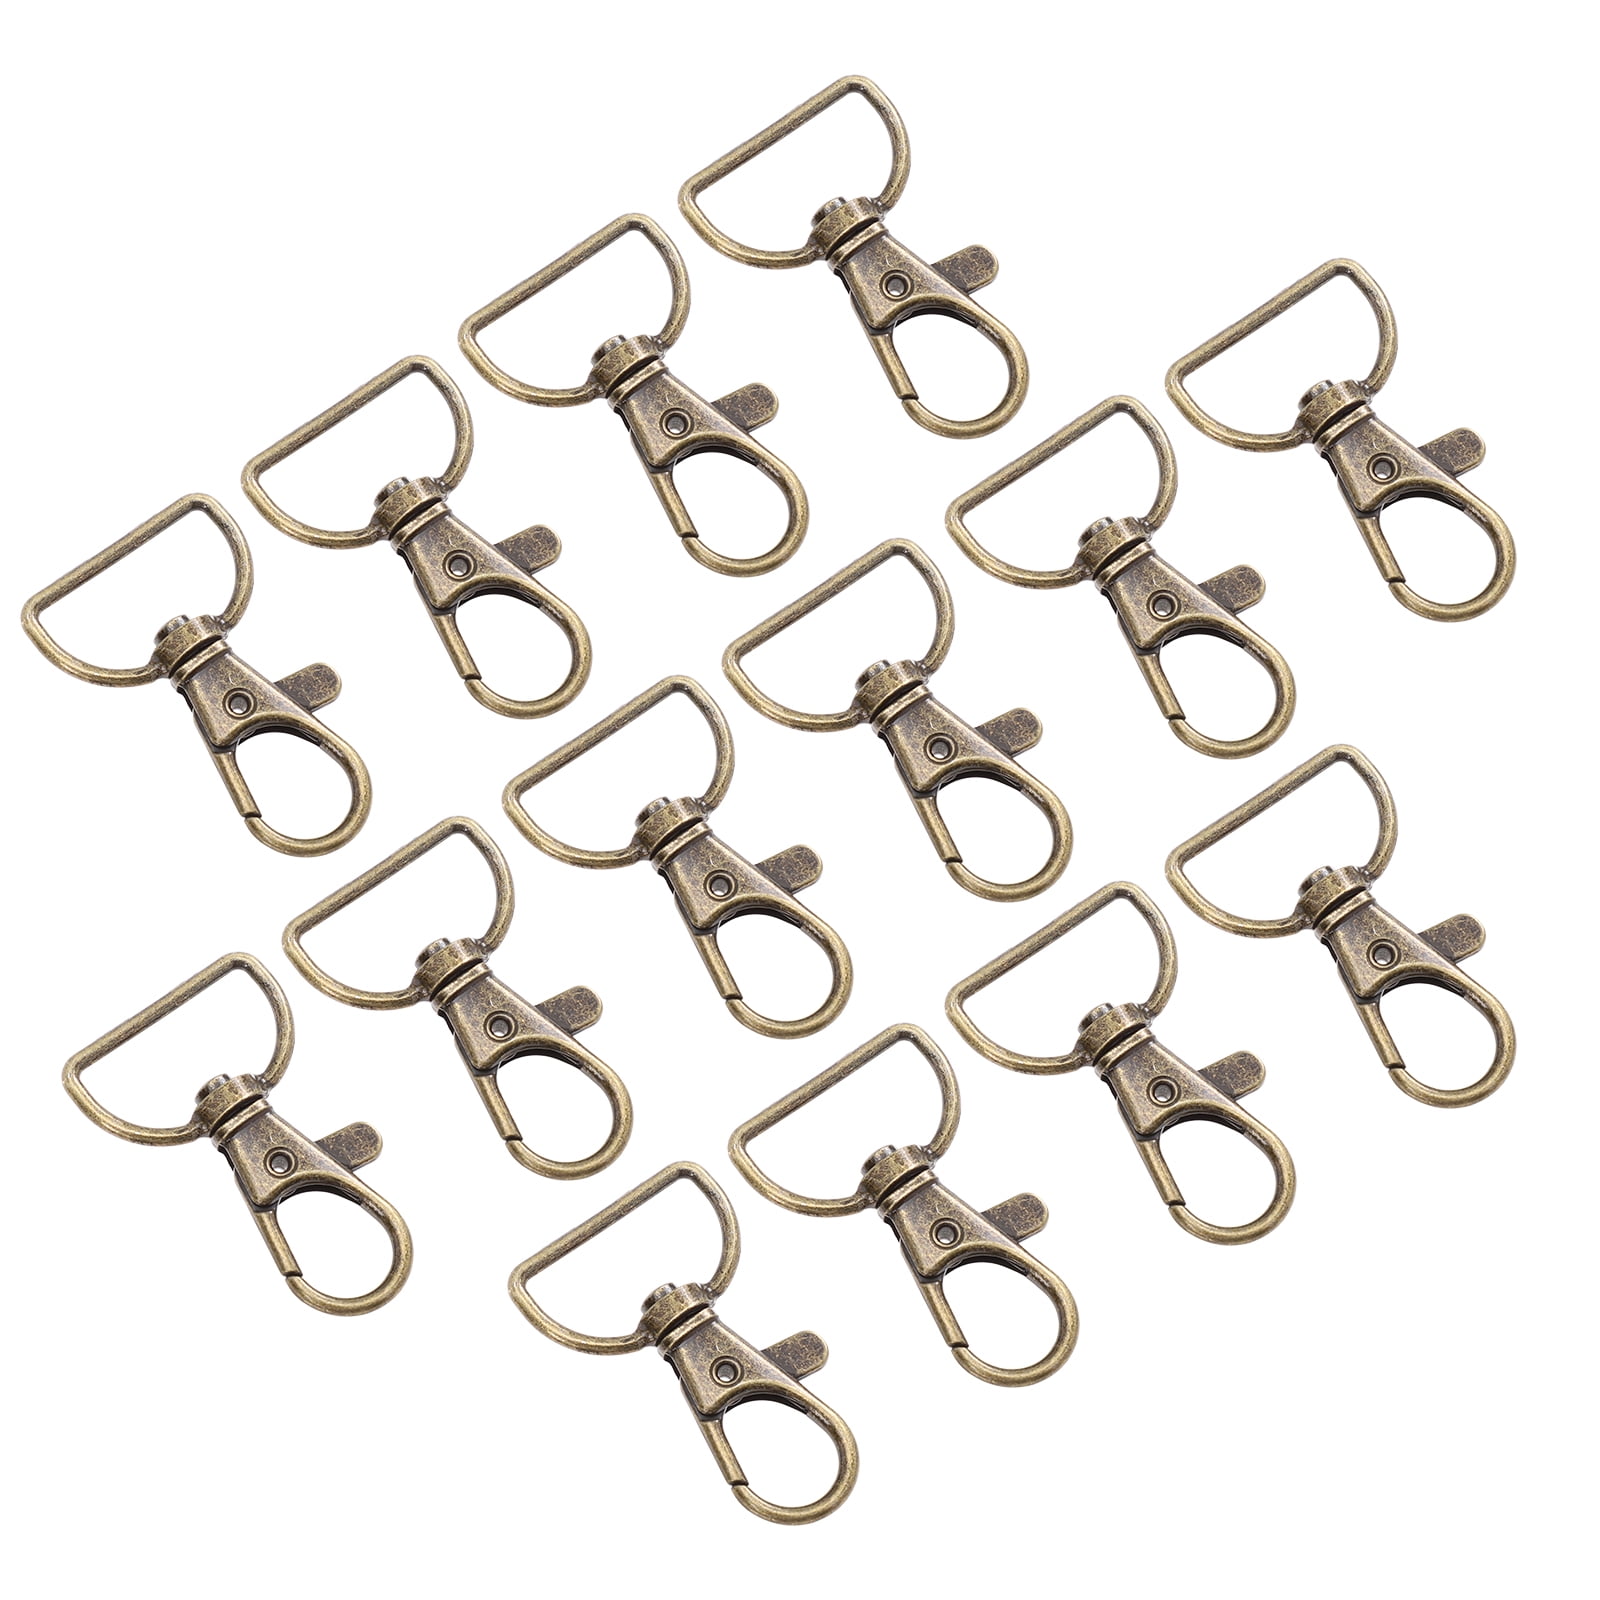 70 pcs Lobster Claw Clasp Lanyard Snap Hooks Metal Hook Clasp Lobster ...